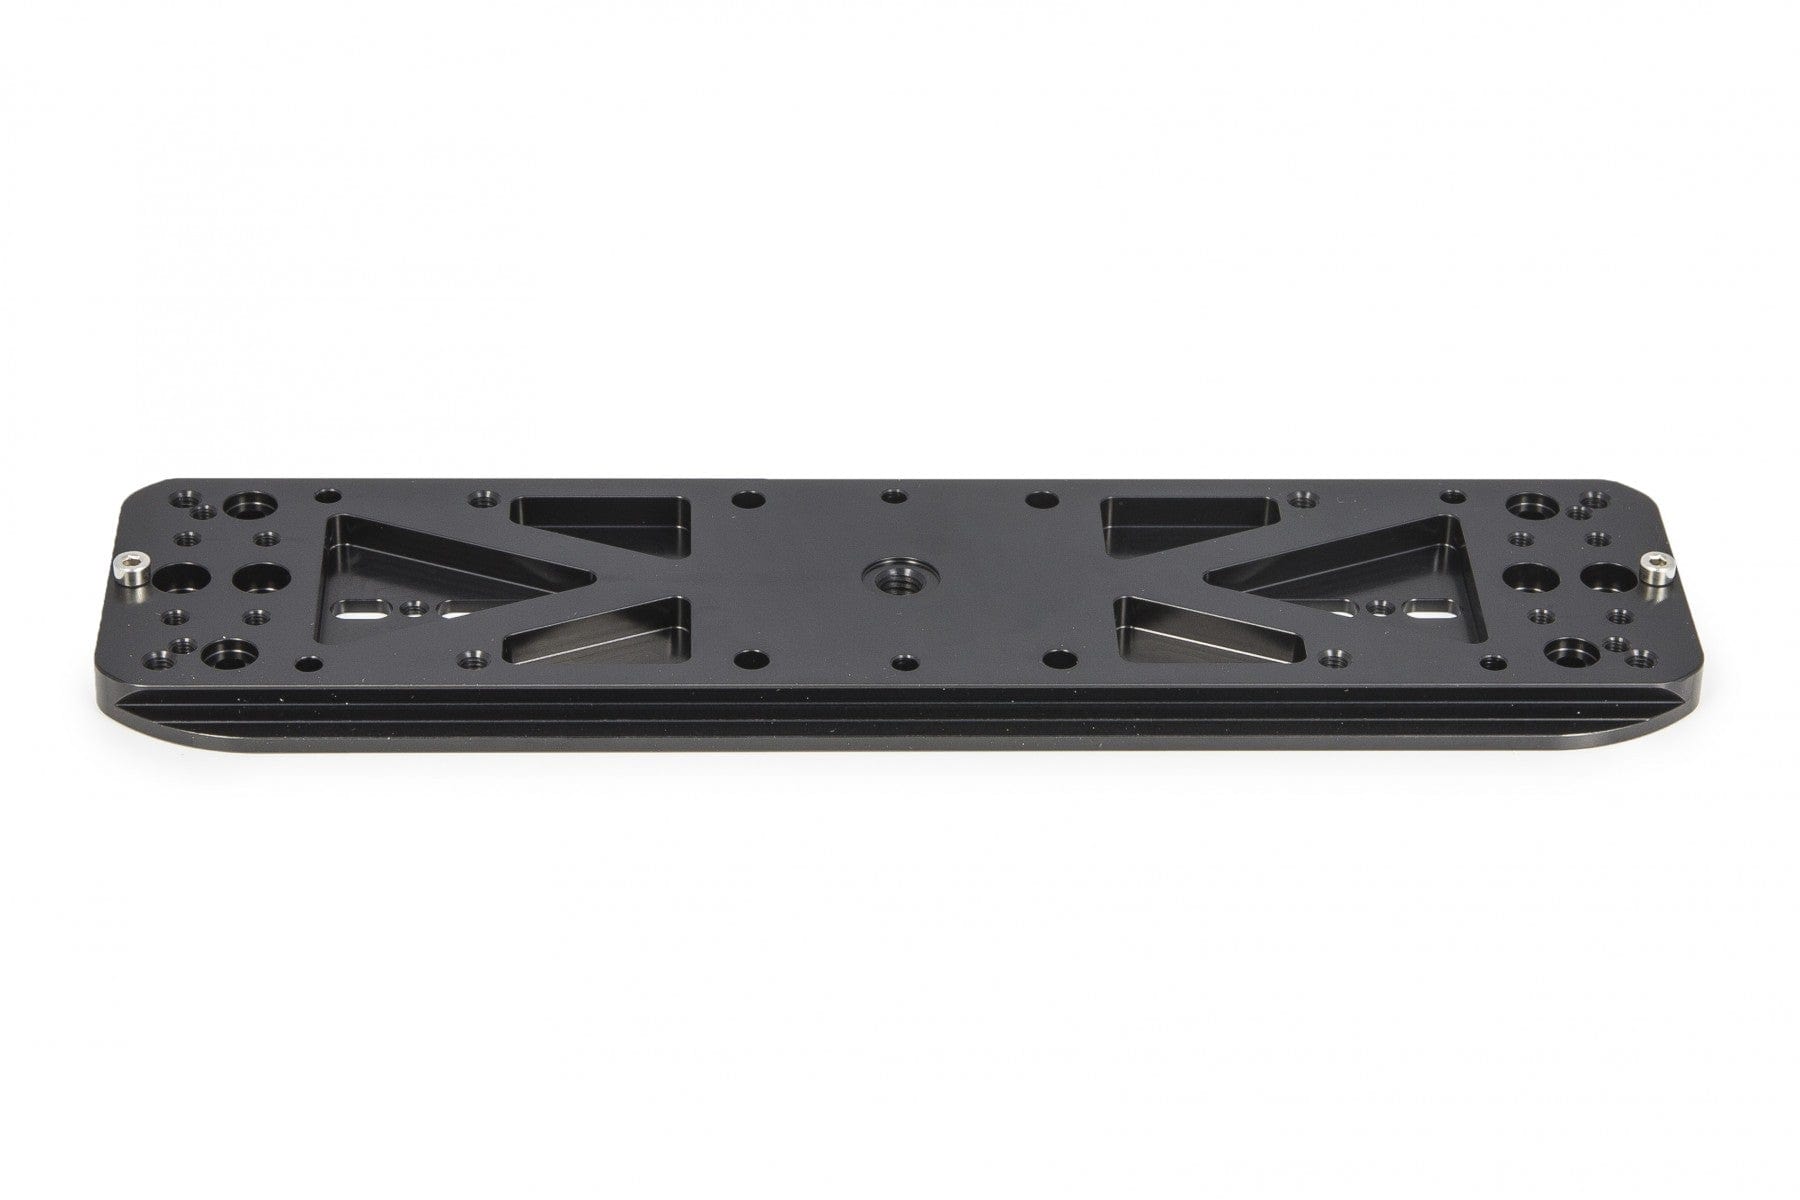 Baader Planetarium Accessory Baader Double 3" Dovetail Mounting plate 300mm for guidescope rings as well as Stronghold and various Clamps, eg. Pan EQ- and V-Clamp, predrilled to fit 10Micron and Astro Physics mounts - 1500330